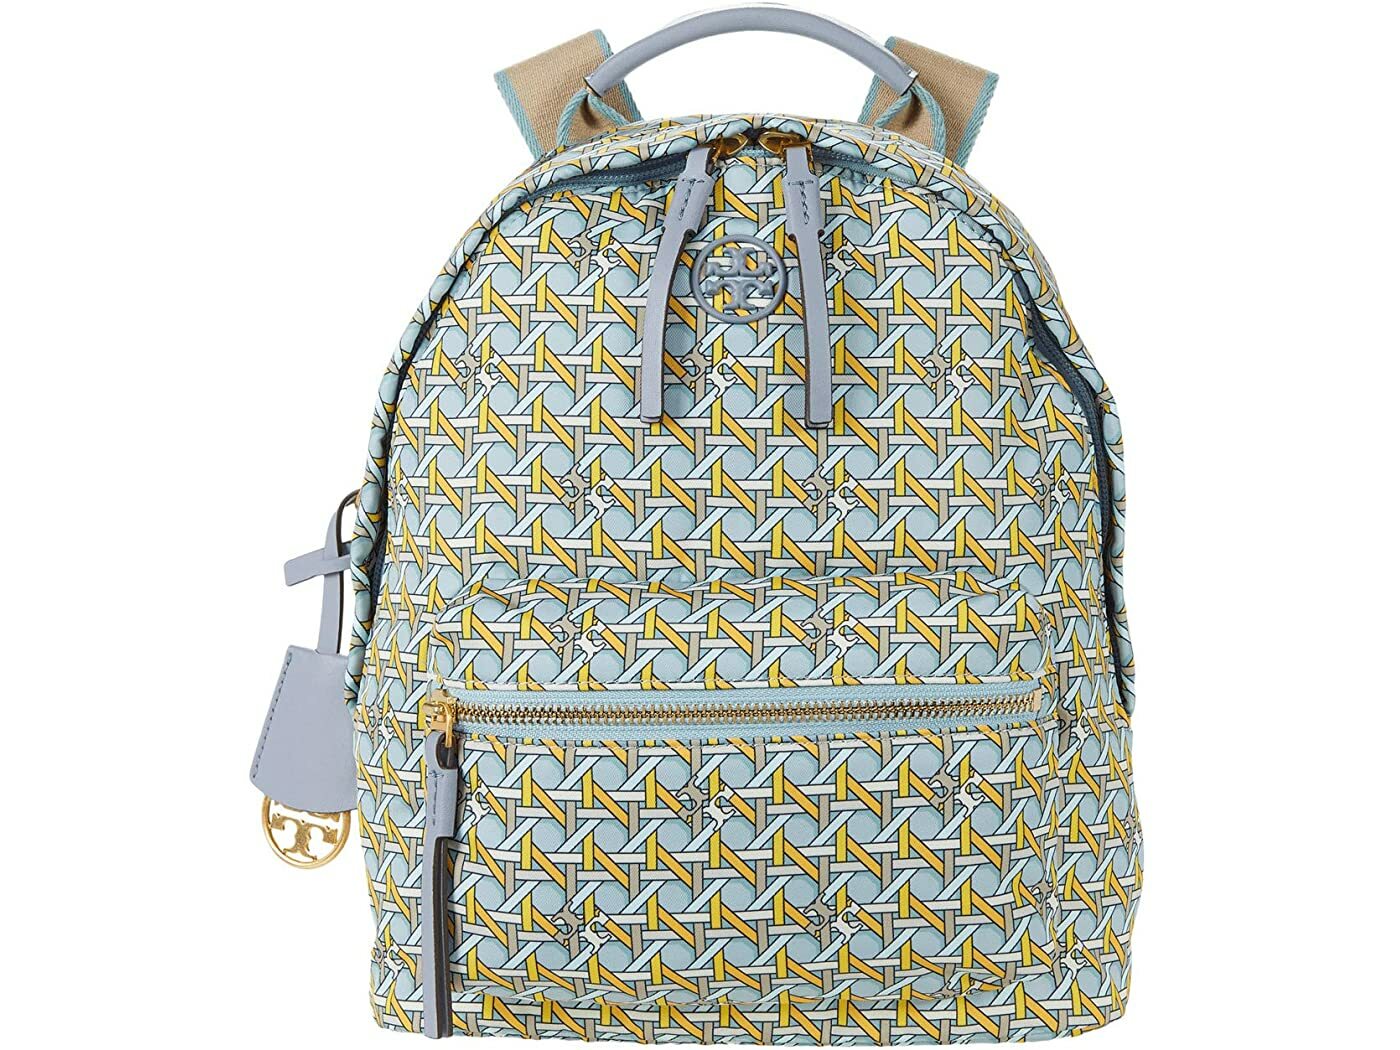 Tory Burch Backpack Piper Gingham Zip black white Sold Out 